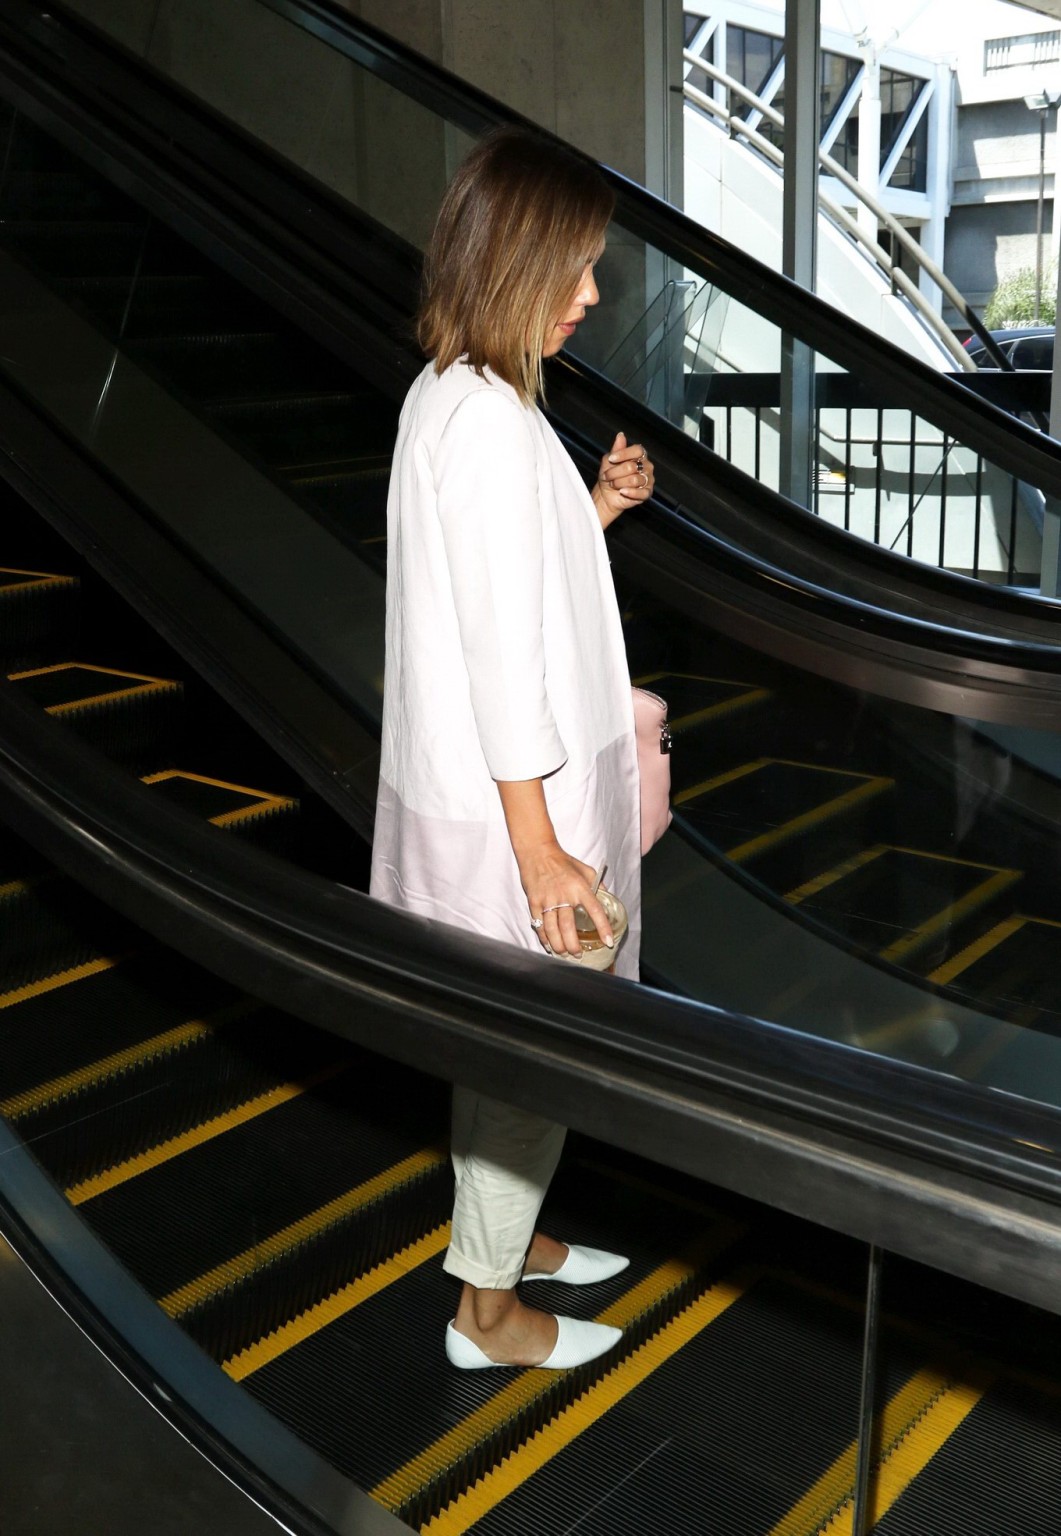 Jessica Alba cleavy wearing a low cut top at LAX Airport #75164957